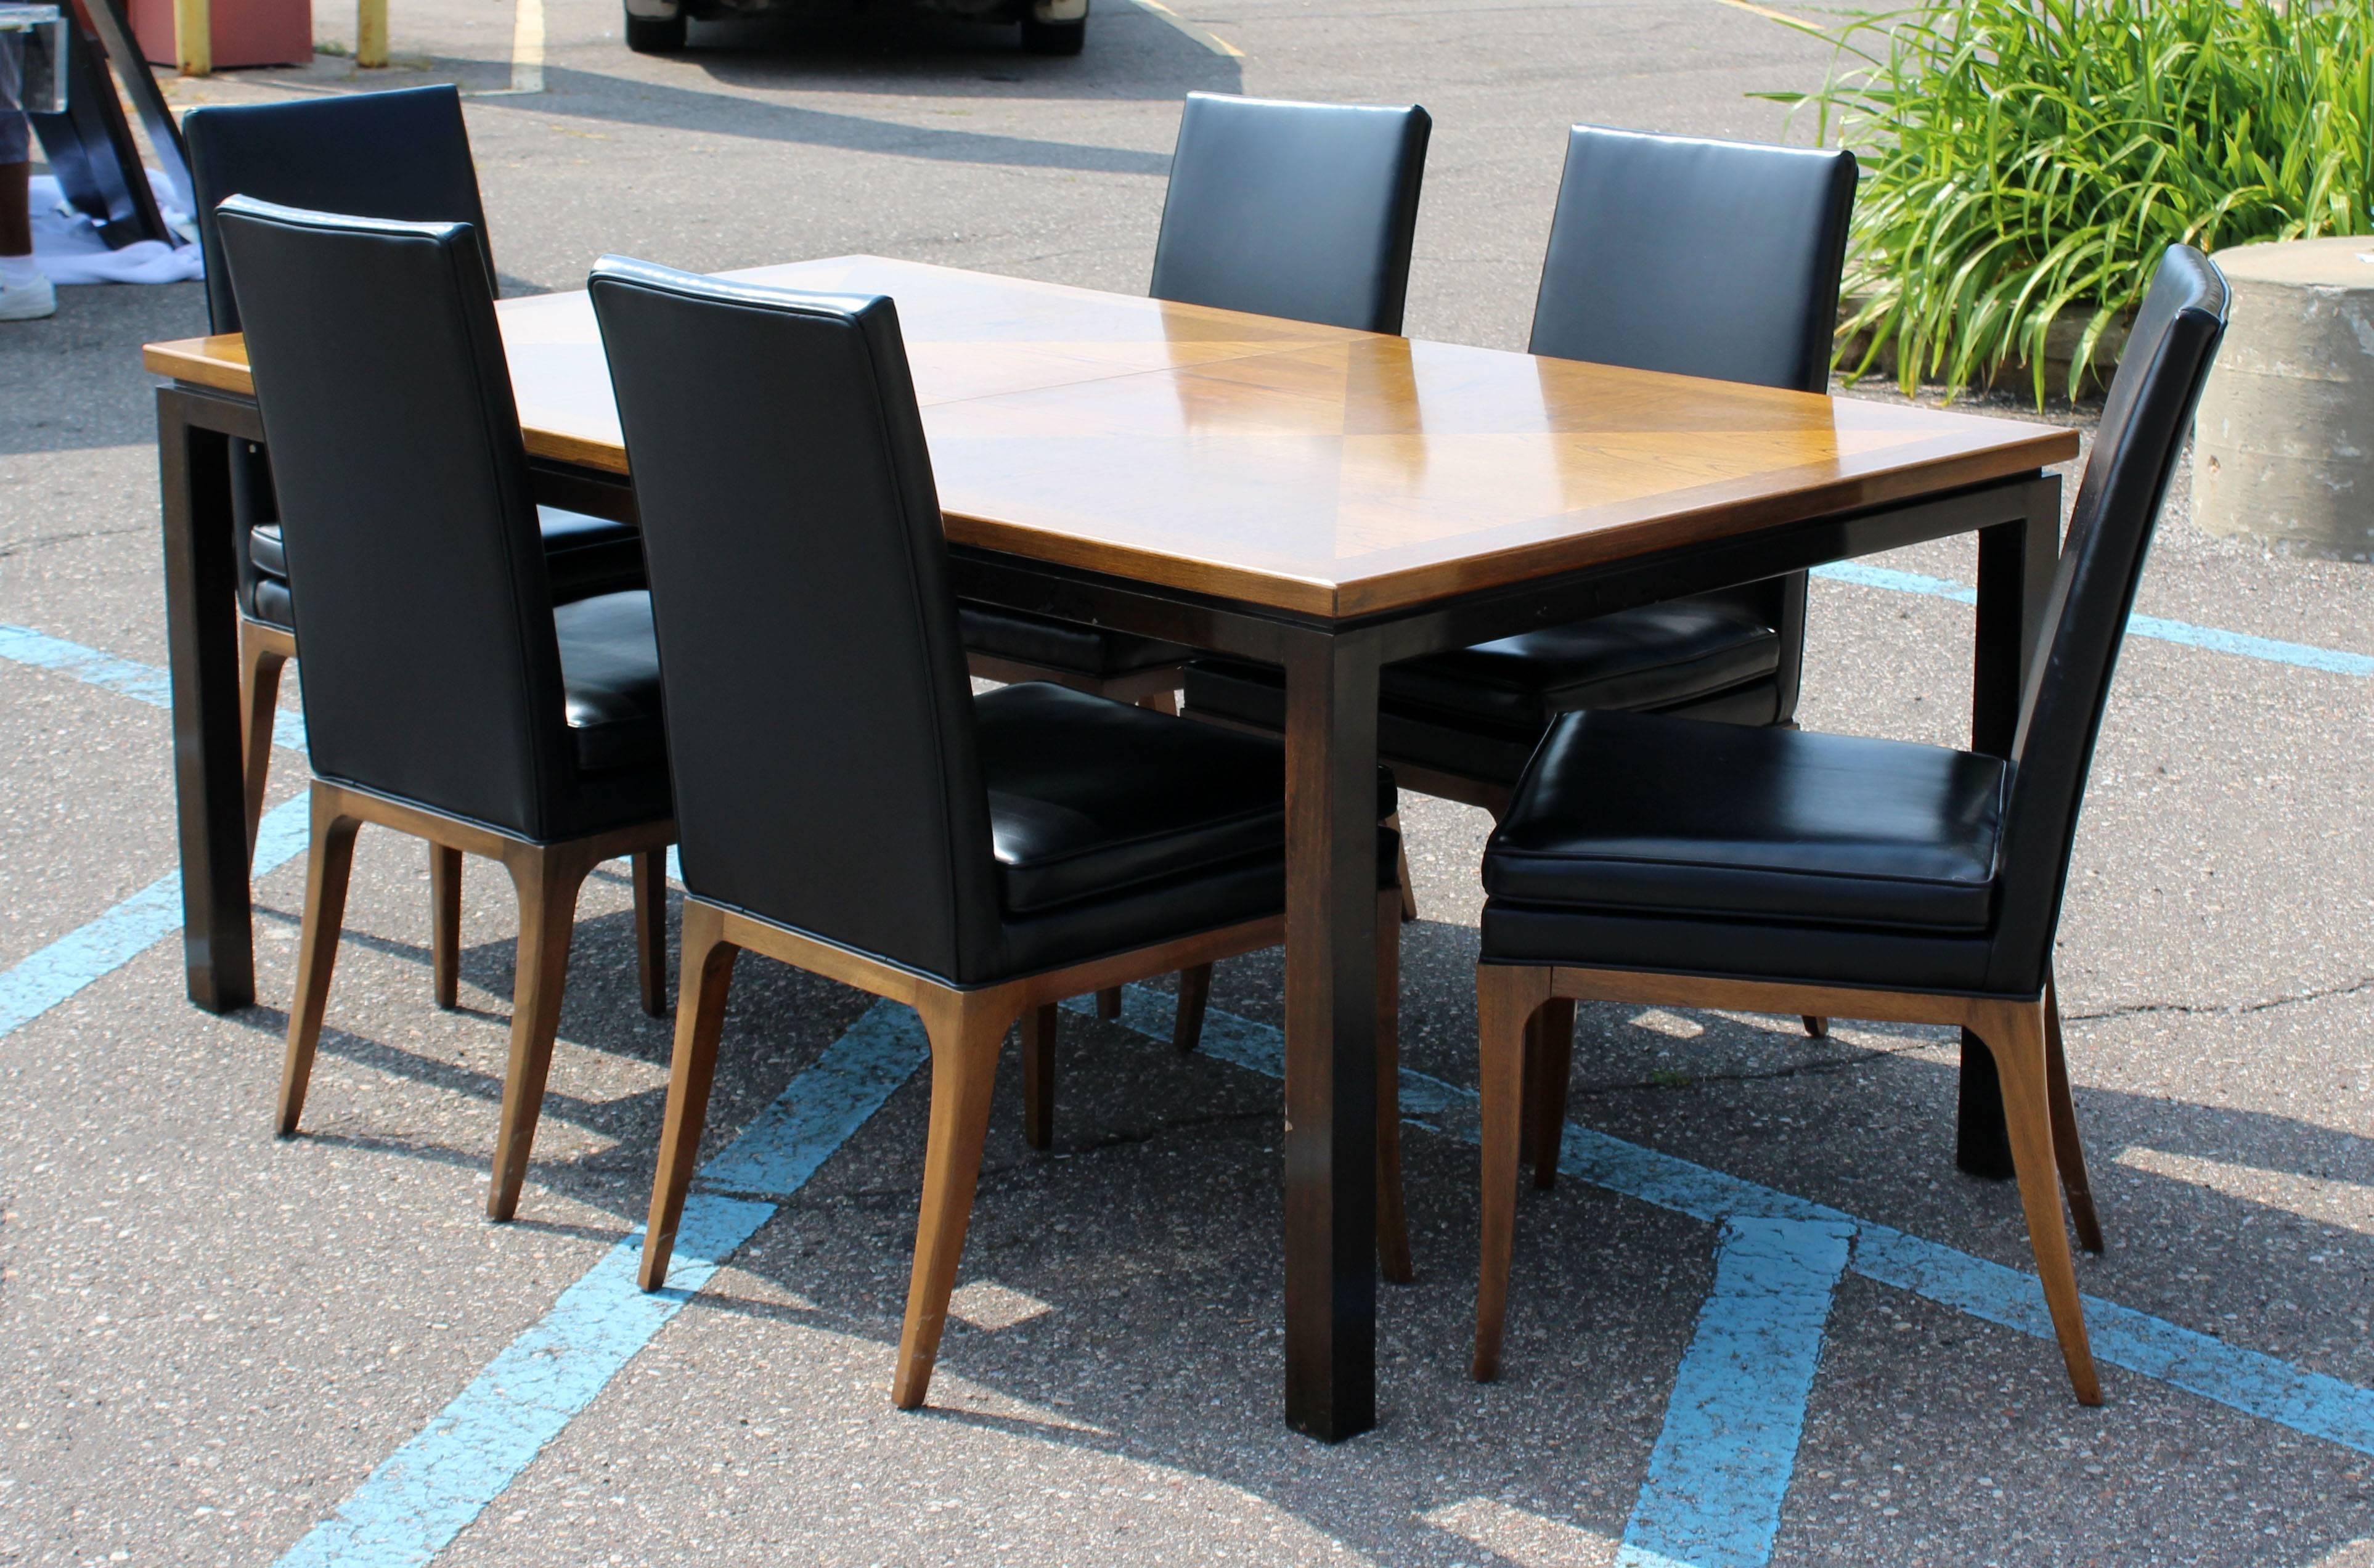 For your consideration is a fantastic dining set from the 1950s by Harvey Probber. The incredible walnut and mahogany parsons style table has three leaves and the six dining chairs are covered in black vinyl. In excellent condition. The dimensions